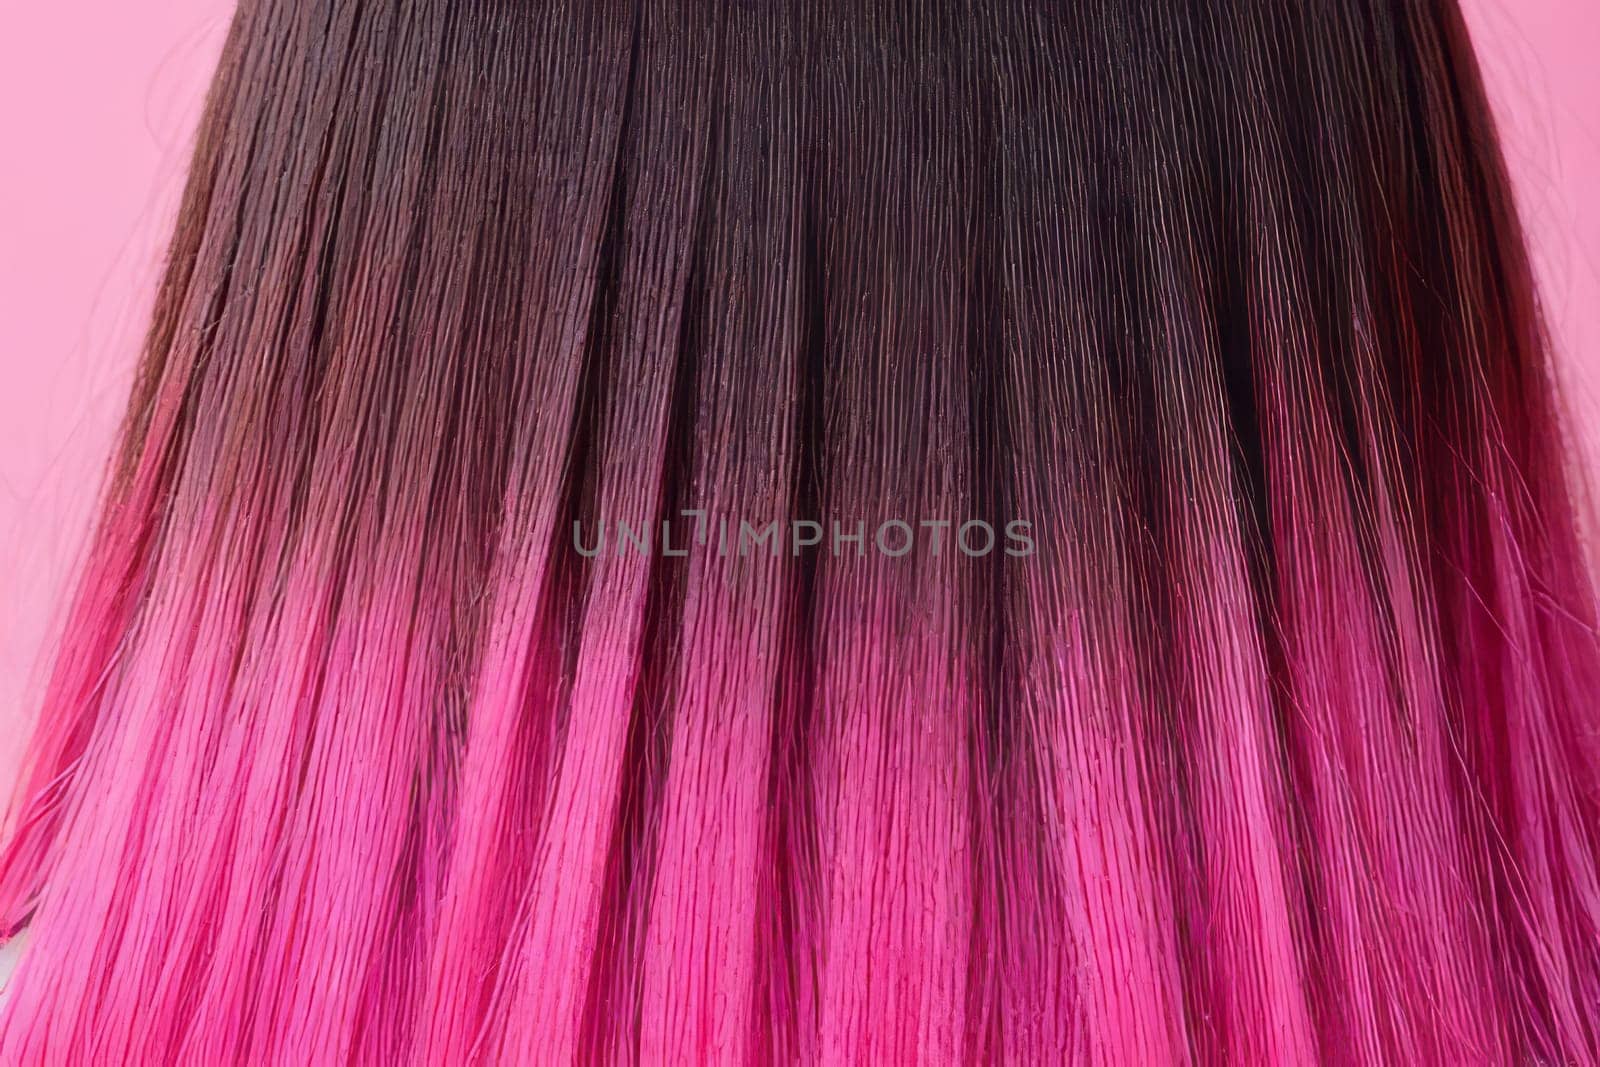 A captivating close-up view of the beautiful pink hair displays the artistic ombre technique, exuding a sense of glamour and refinement